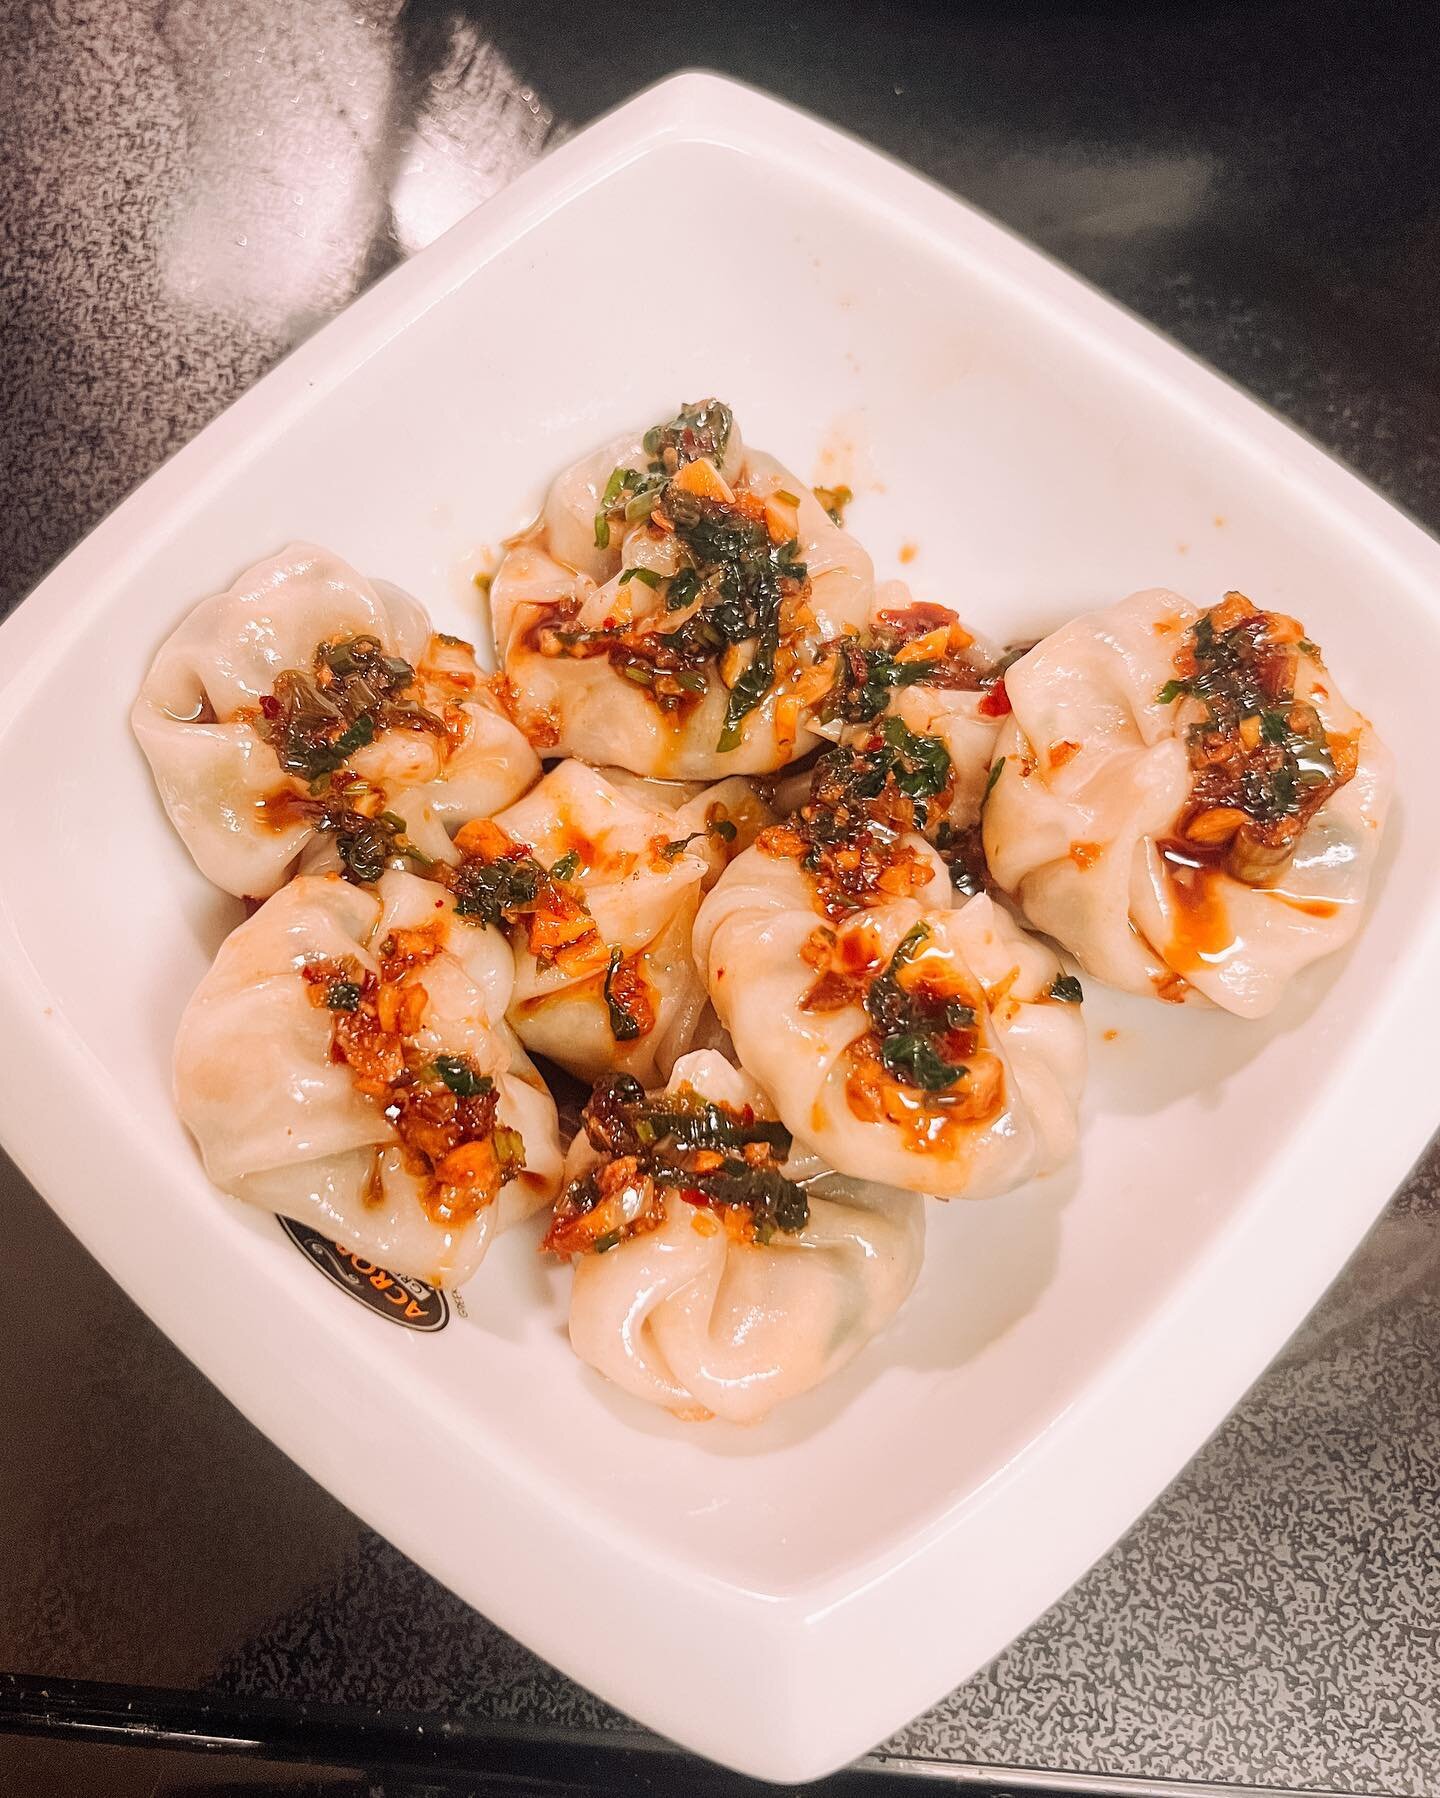 Westshore Fresh Market had the biggest fresh shiitake mushrooms I&rsquo;ve ever seen, and so, they were brought home and dumplings were made. 🥟 The wrappers are filled with diced shiitake saut&eacute;ed with garlic, ginger, green onions and cilantro